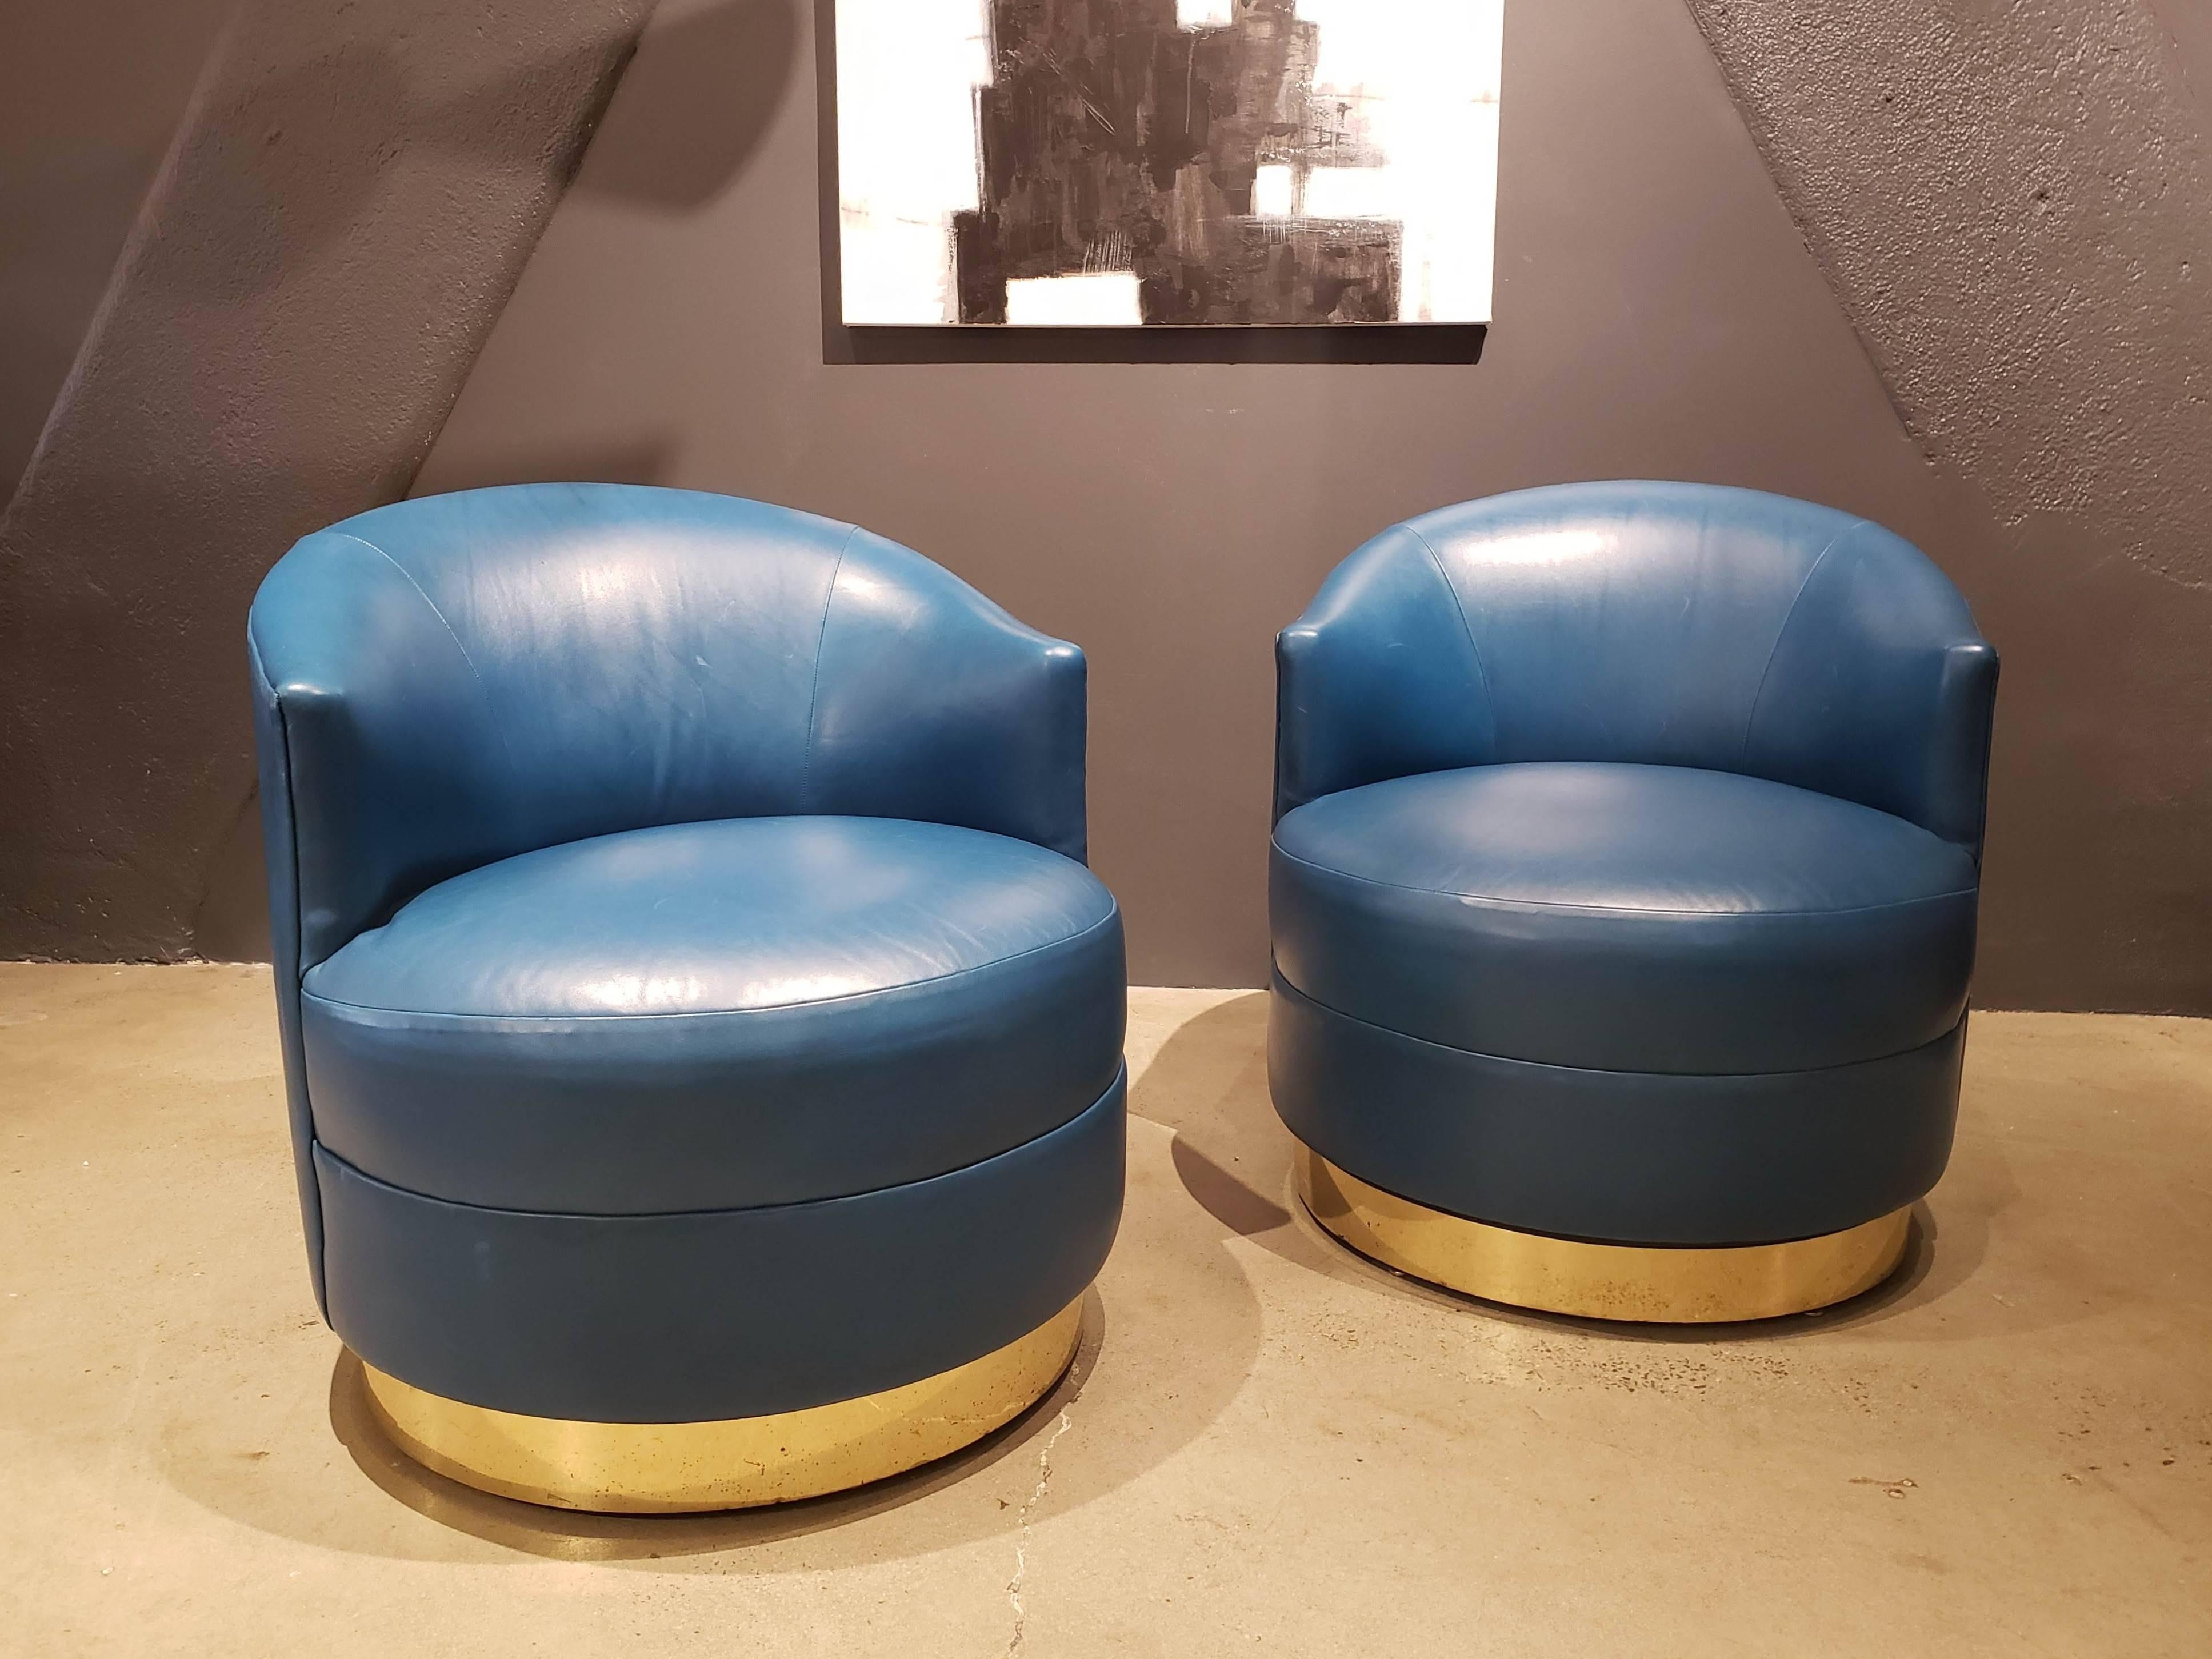 Stunning pair of swivel chairs with brass bases designed by Karl Springer, circa 1980. These are in the original buttery soft teal or cyan leather--the color is so rich and regal. Comfortable and stout and a handsome design statement. Brass bases